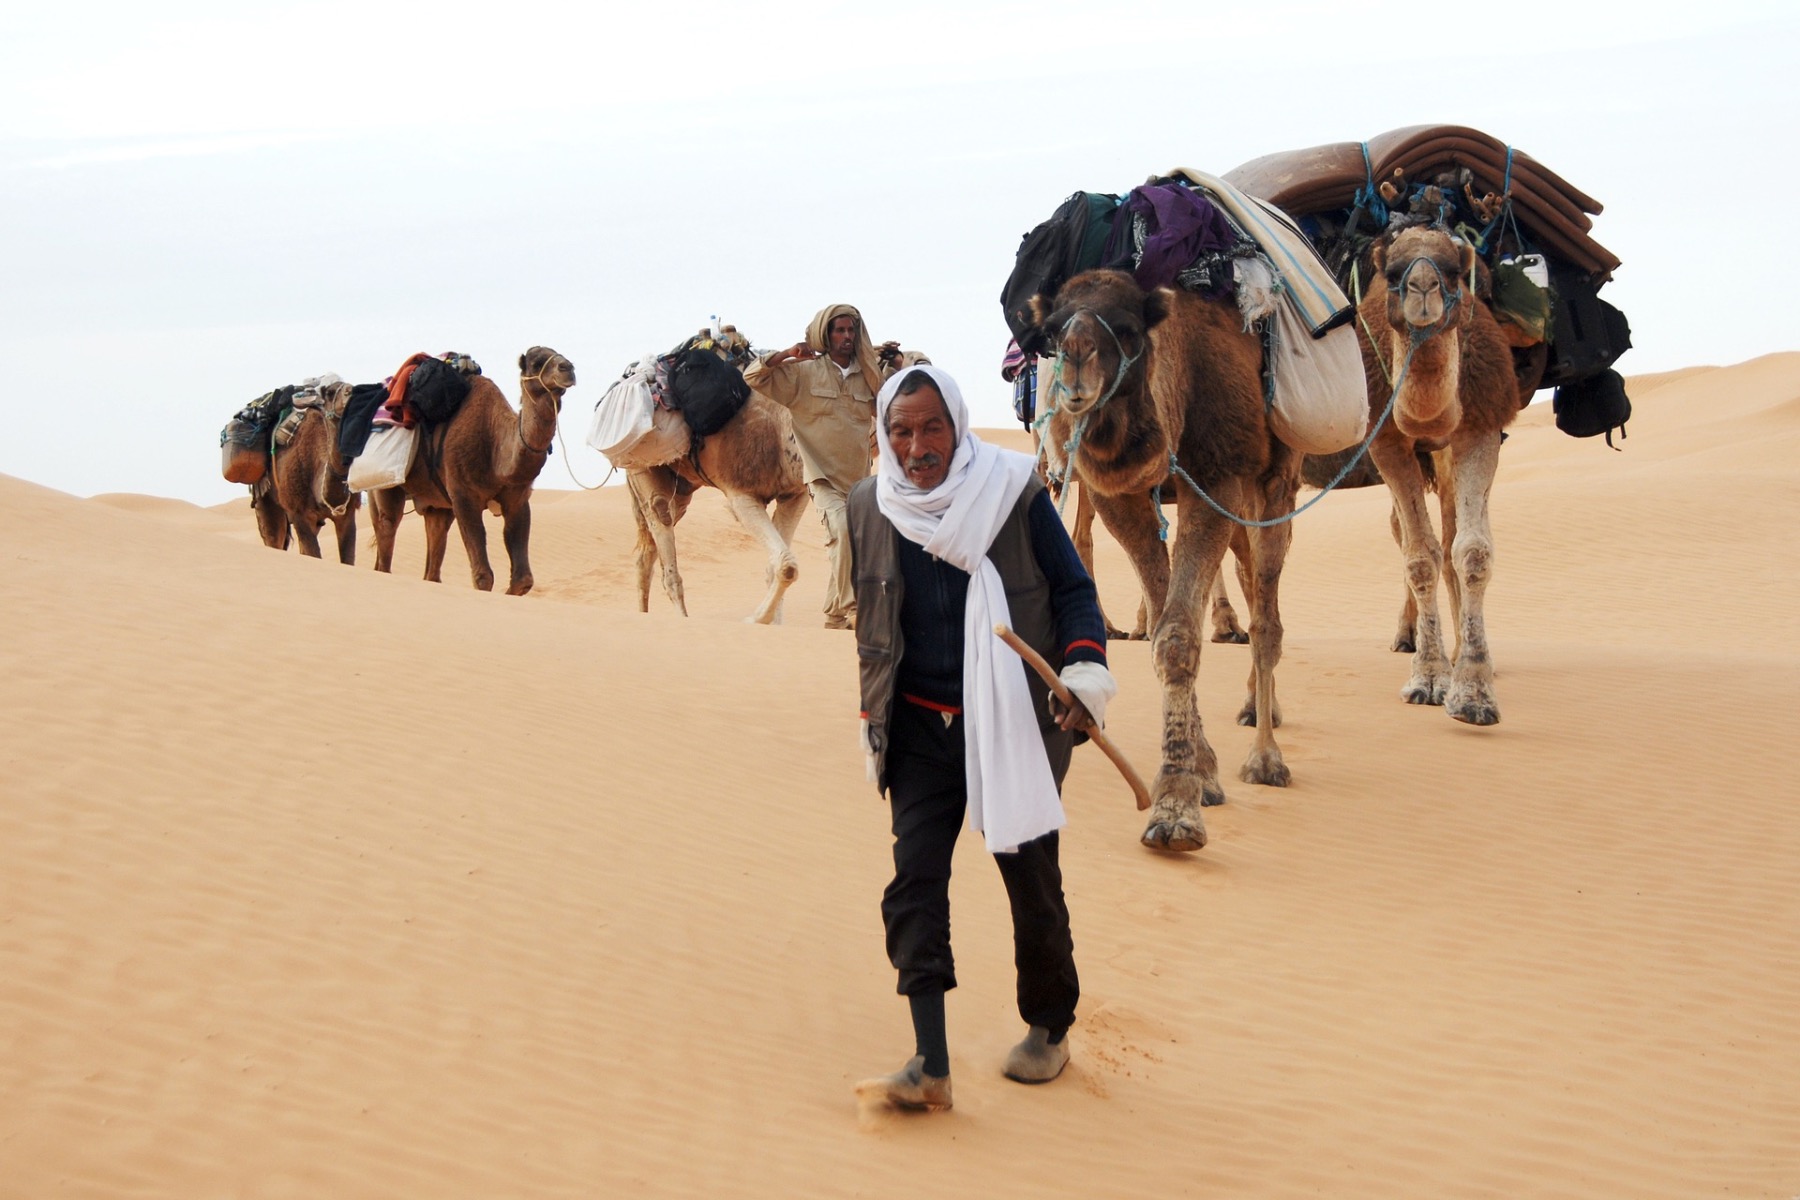 Bedouins and Camels